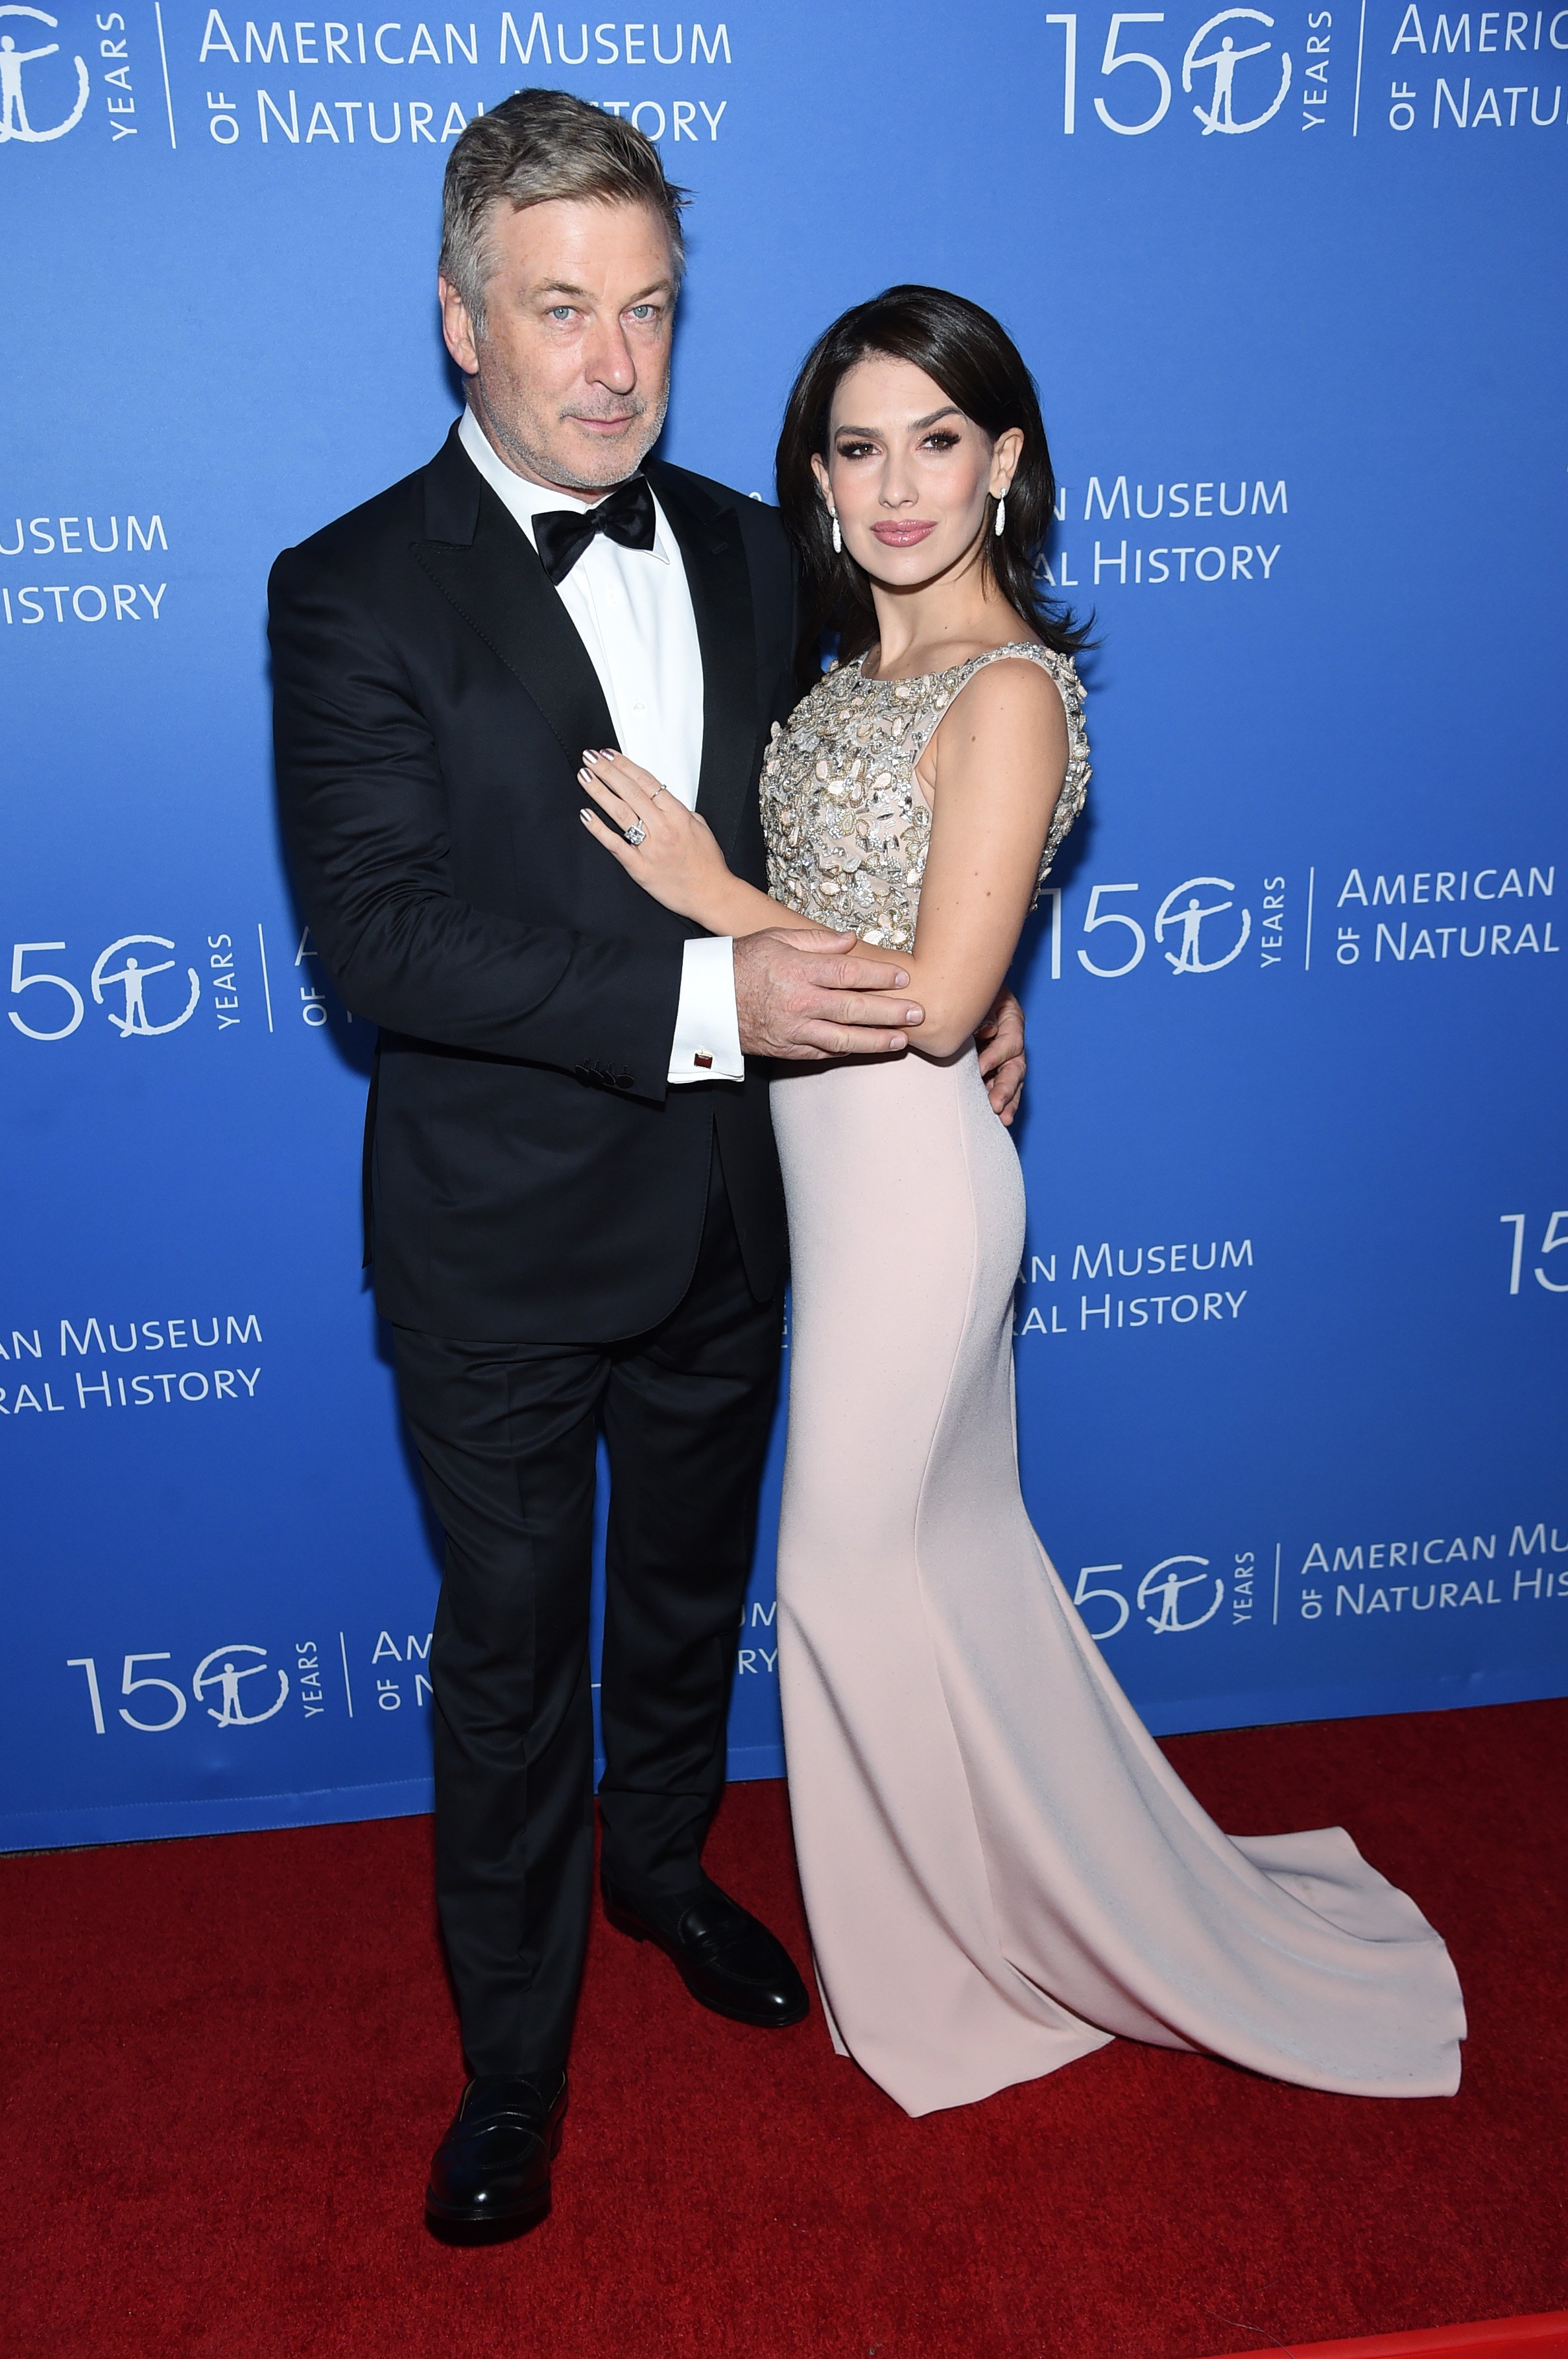 Alec Baldwin and Hilaria Baldwin attend the American Museum Of Natural History 2019 Gala on November 21, 2019, in New York City. | Source: Getty Images.